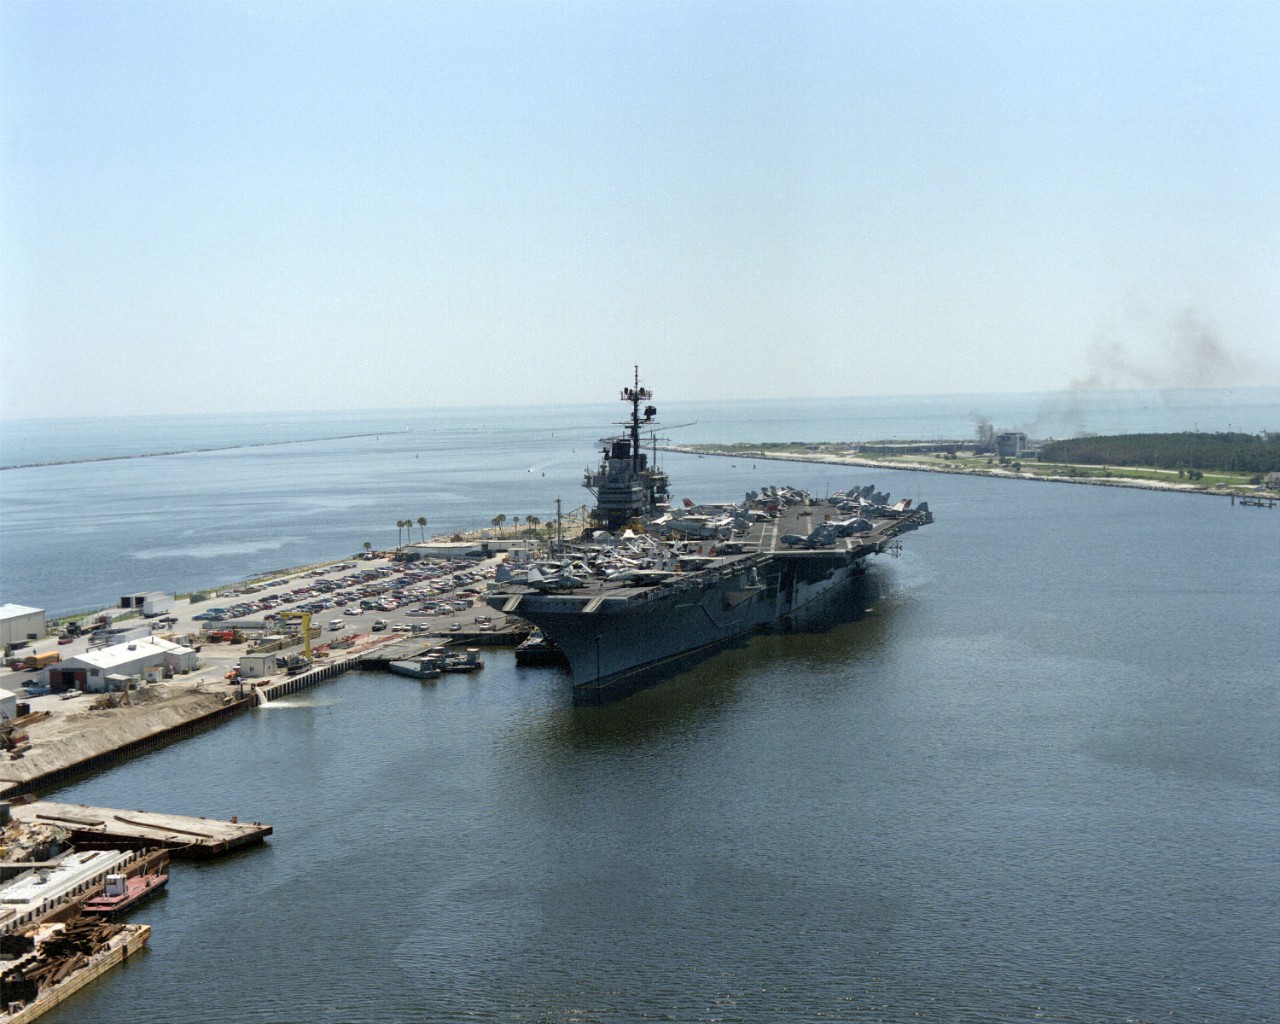 330-CFD-DN-SC-93-03439:  USS Forrestal (CV-59), 1988.  A port bow view of the aircraft carrier USS Forrestal (CV-59) moored in port, April 22, 1988.  PH2 Willard.   Official U.S. Navy Photograph, now in the collections of the National Archives.    